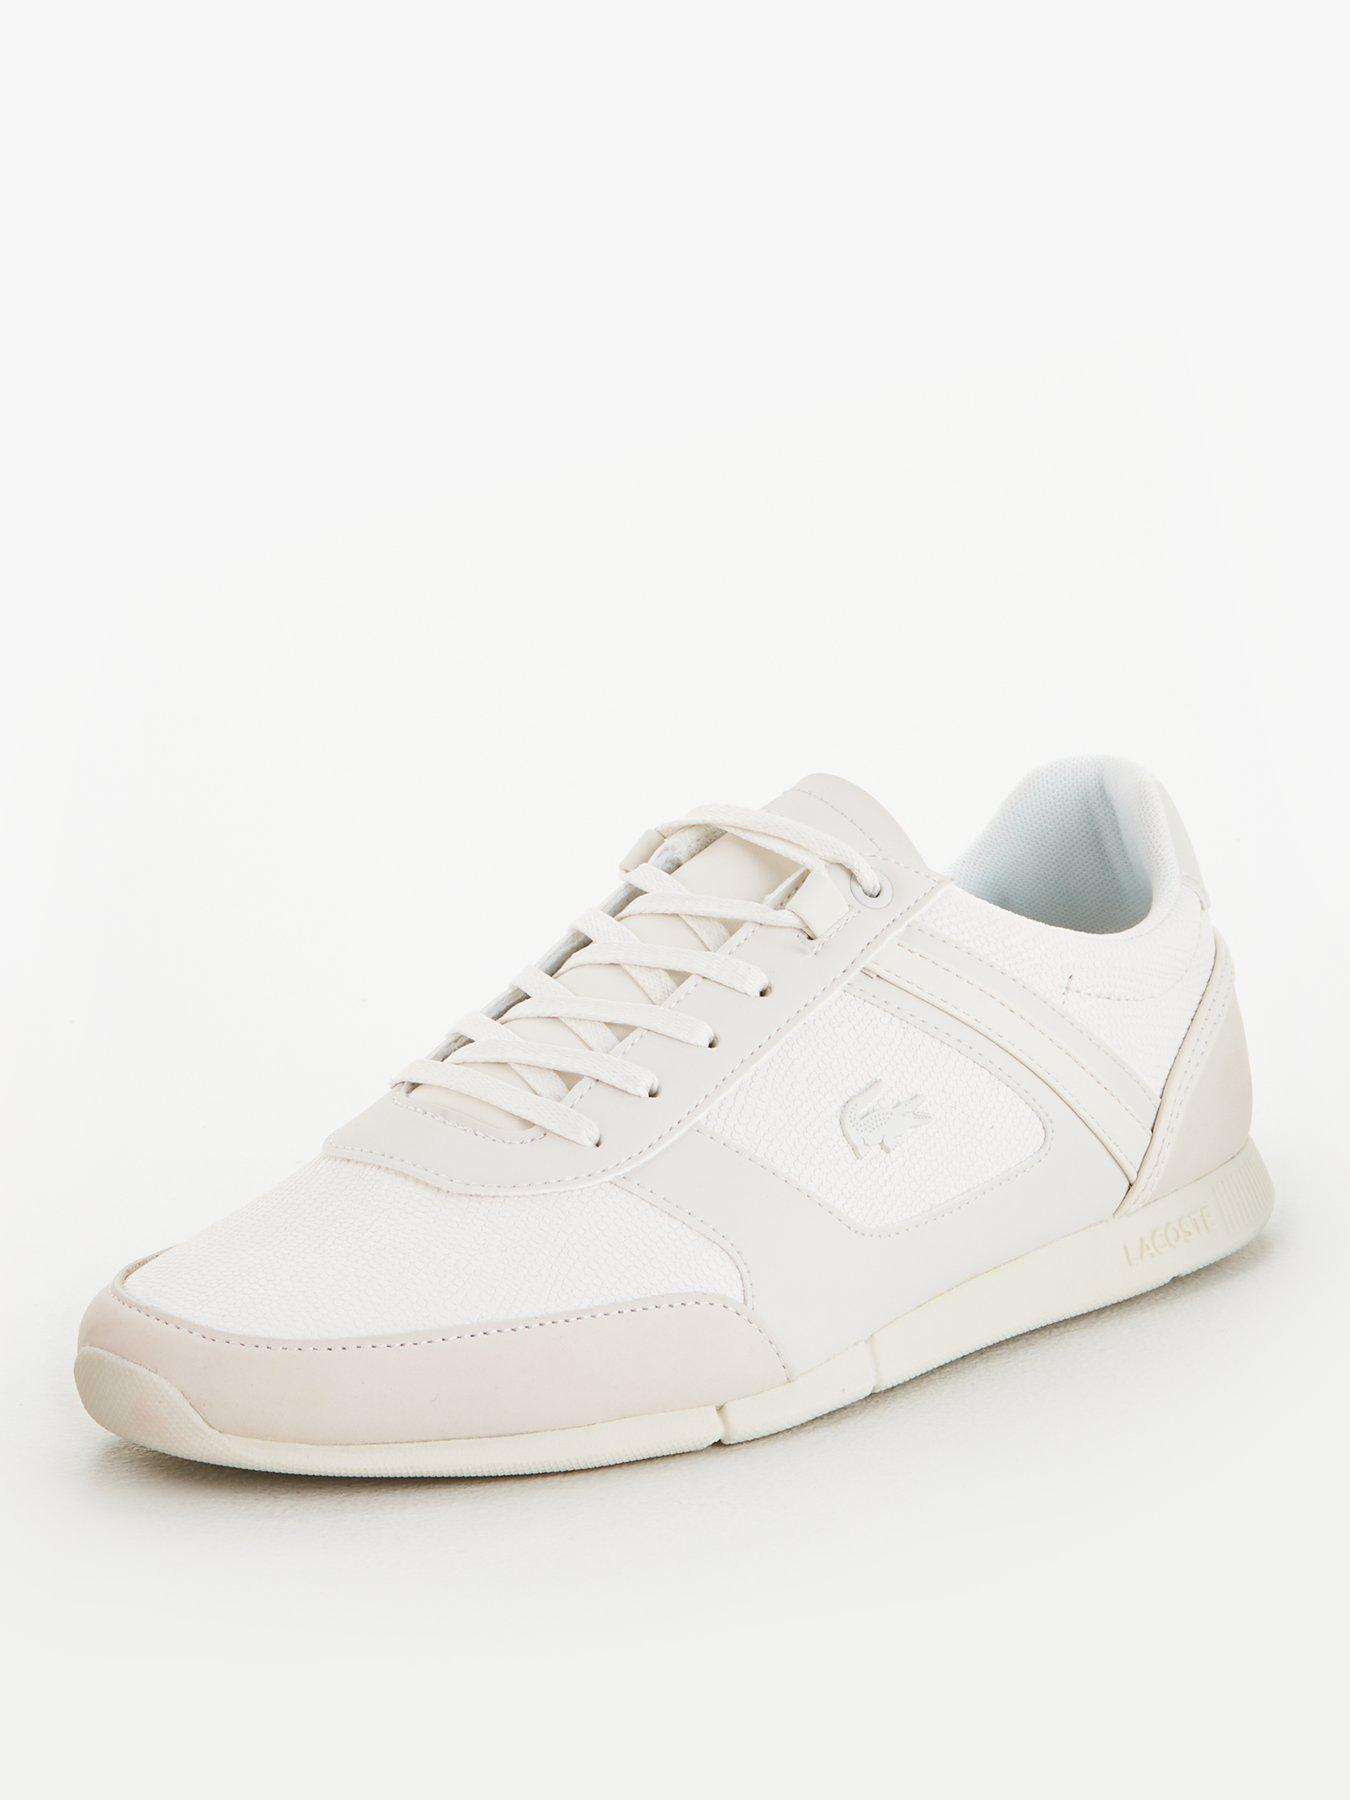 lacoste shoes clearance